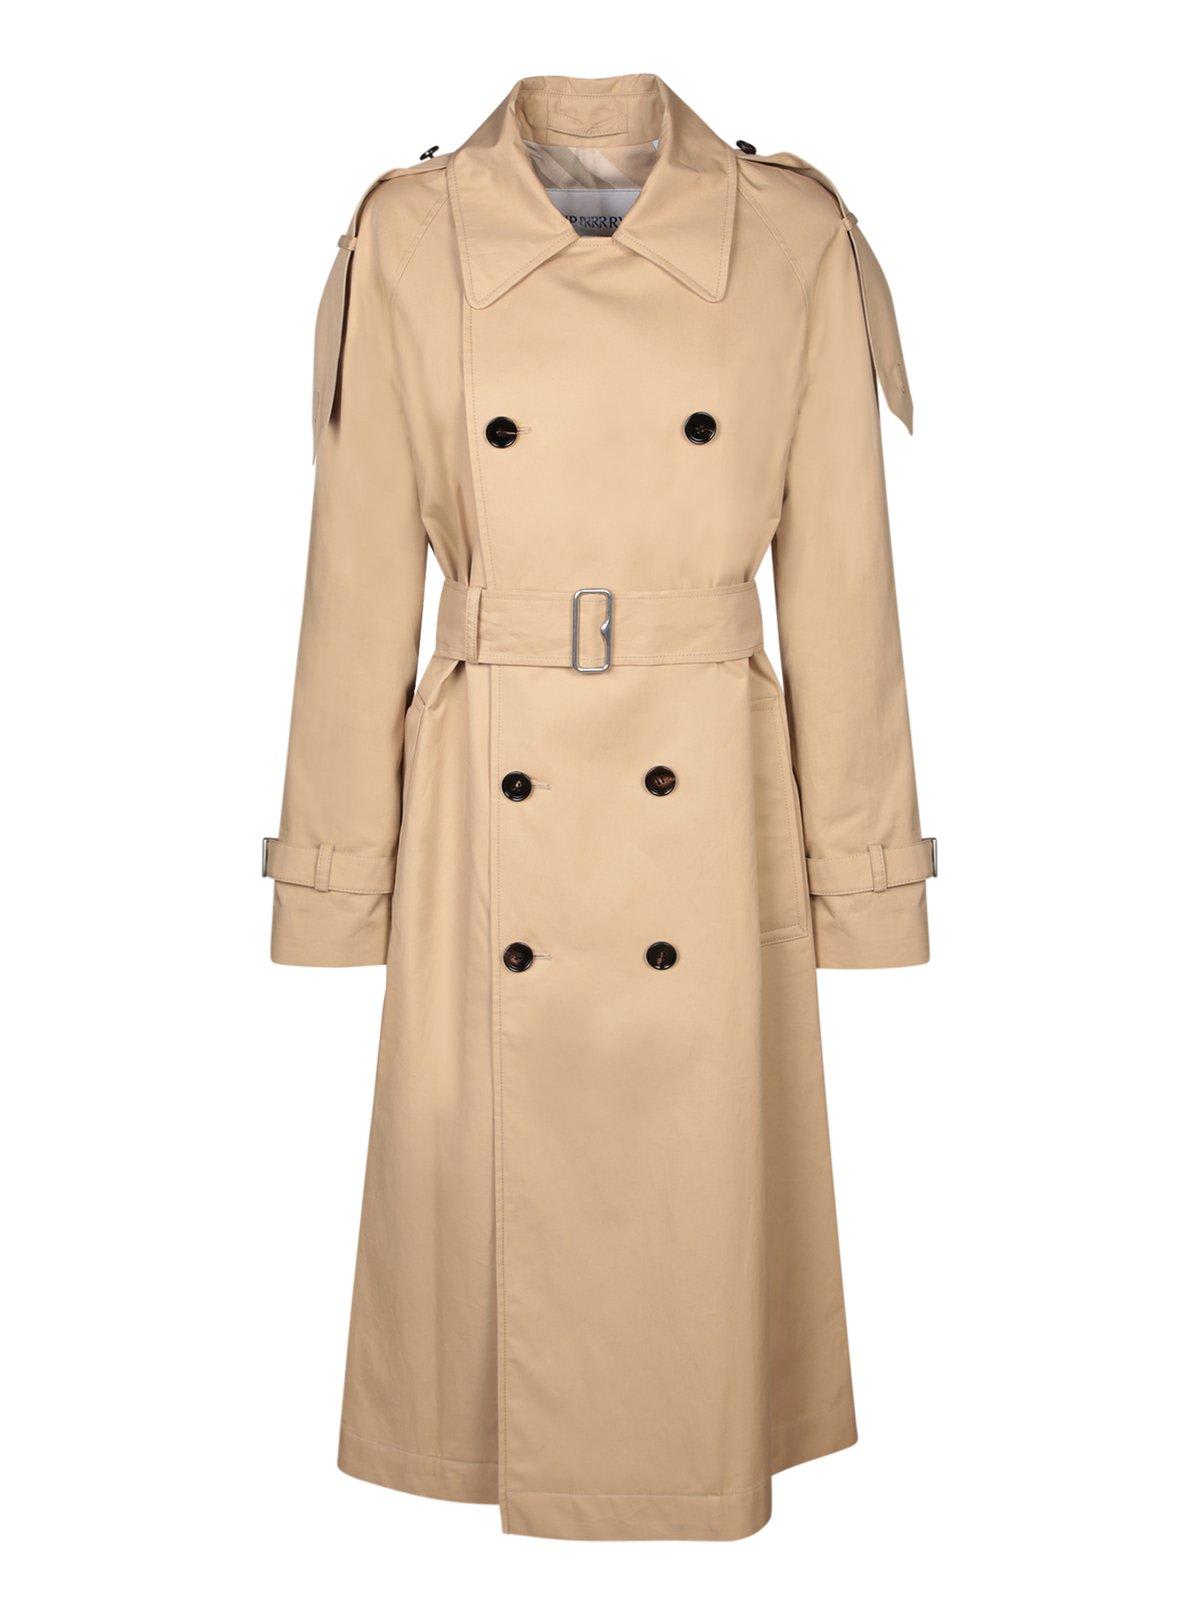 BURBERRY GABARDINE DOUBLE-BREASTED BELTED TRENCH COAT